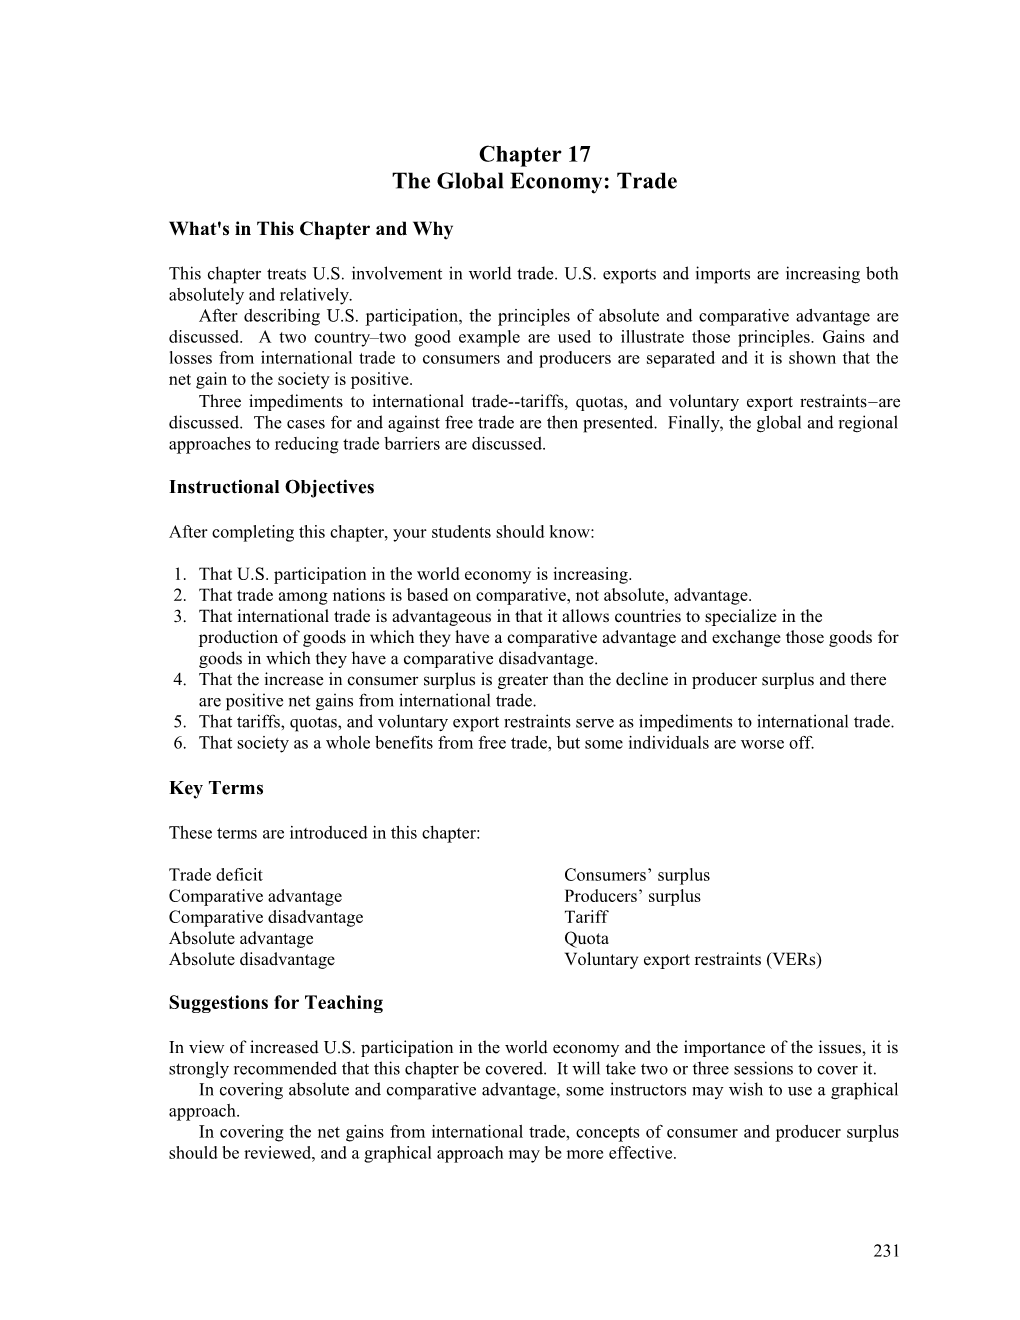 The Global Economy: Trade